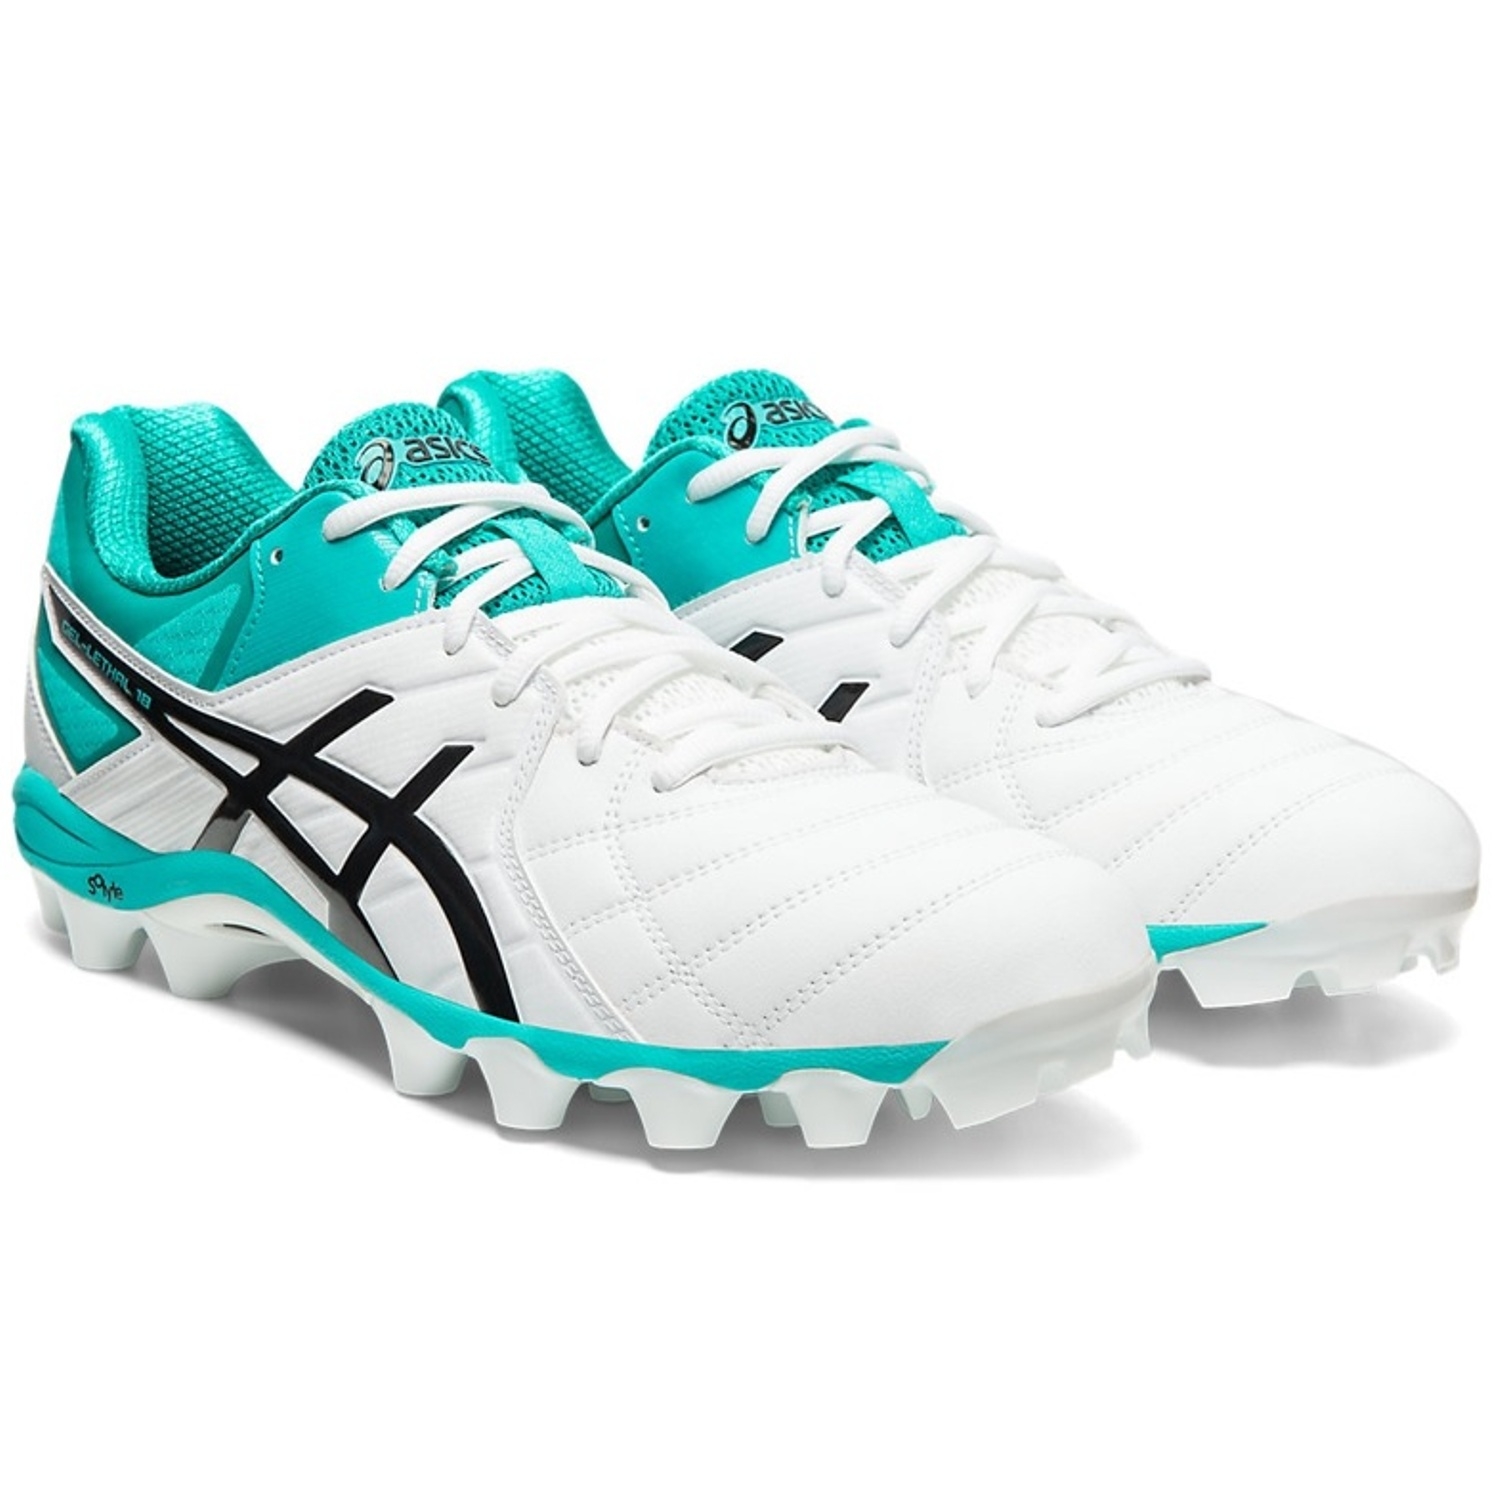 asics gel lethal football boots